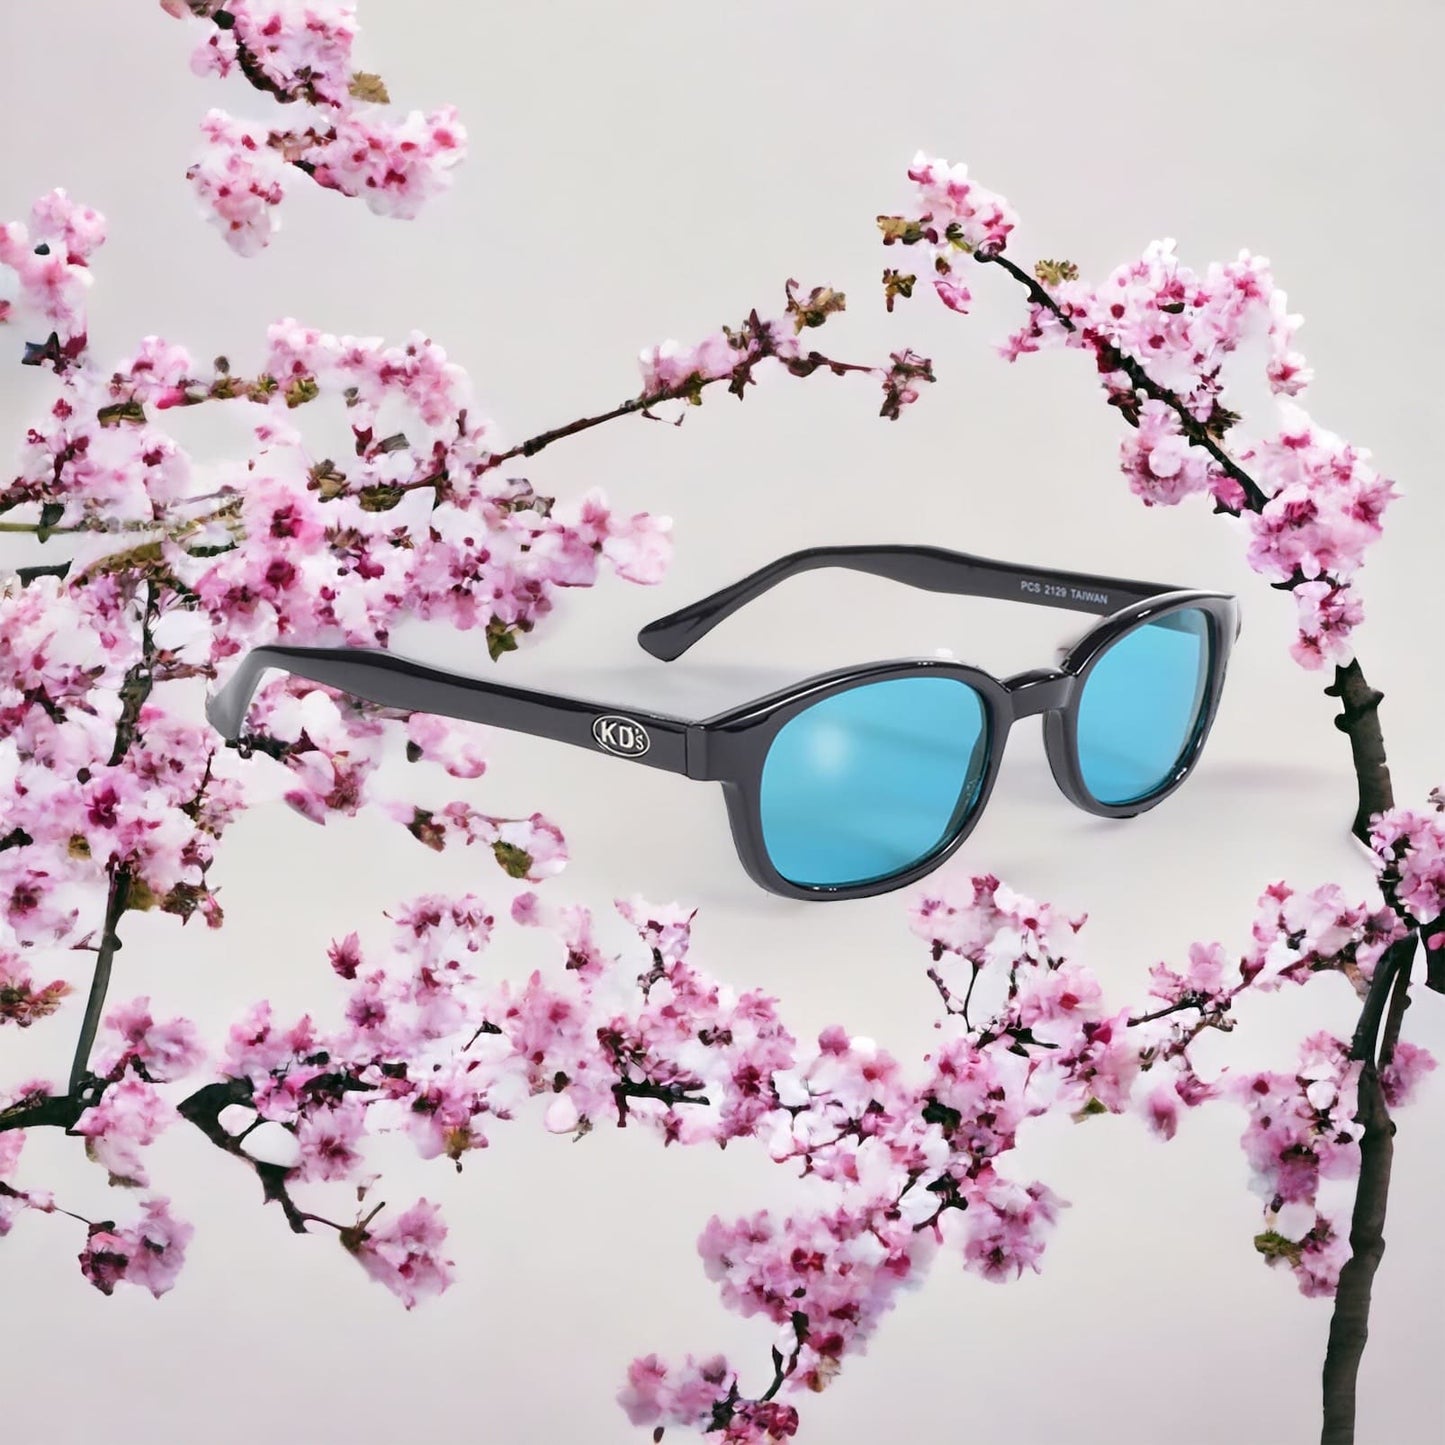 The stylish KD's 2129 sunglasses with turquoise blue polycarbonate lenses and a solid black frame set on cherry blossoms.